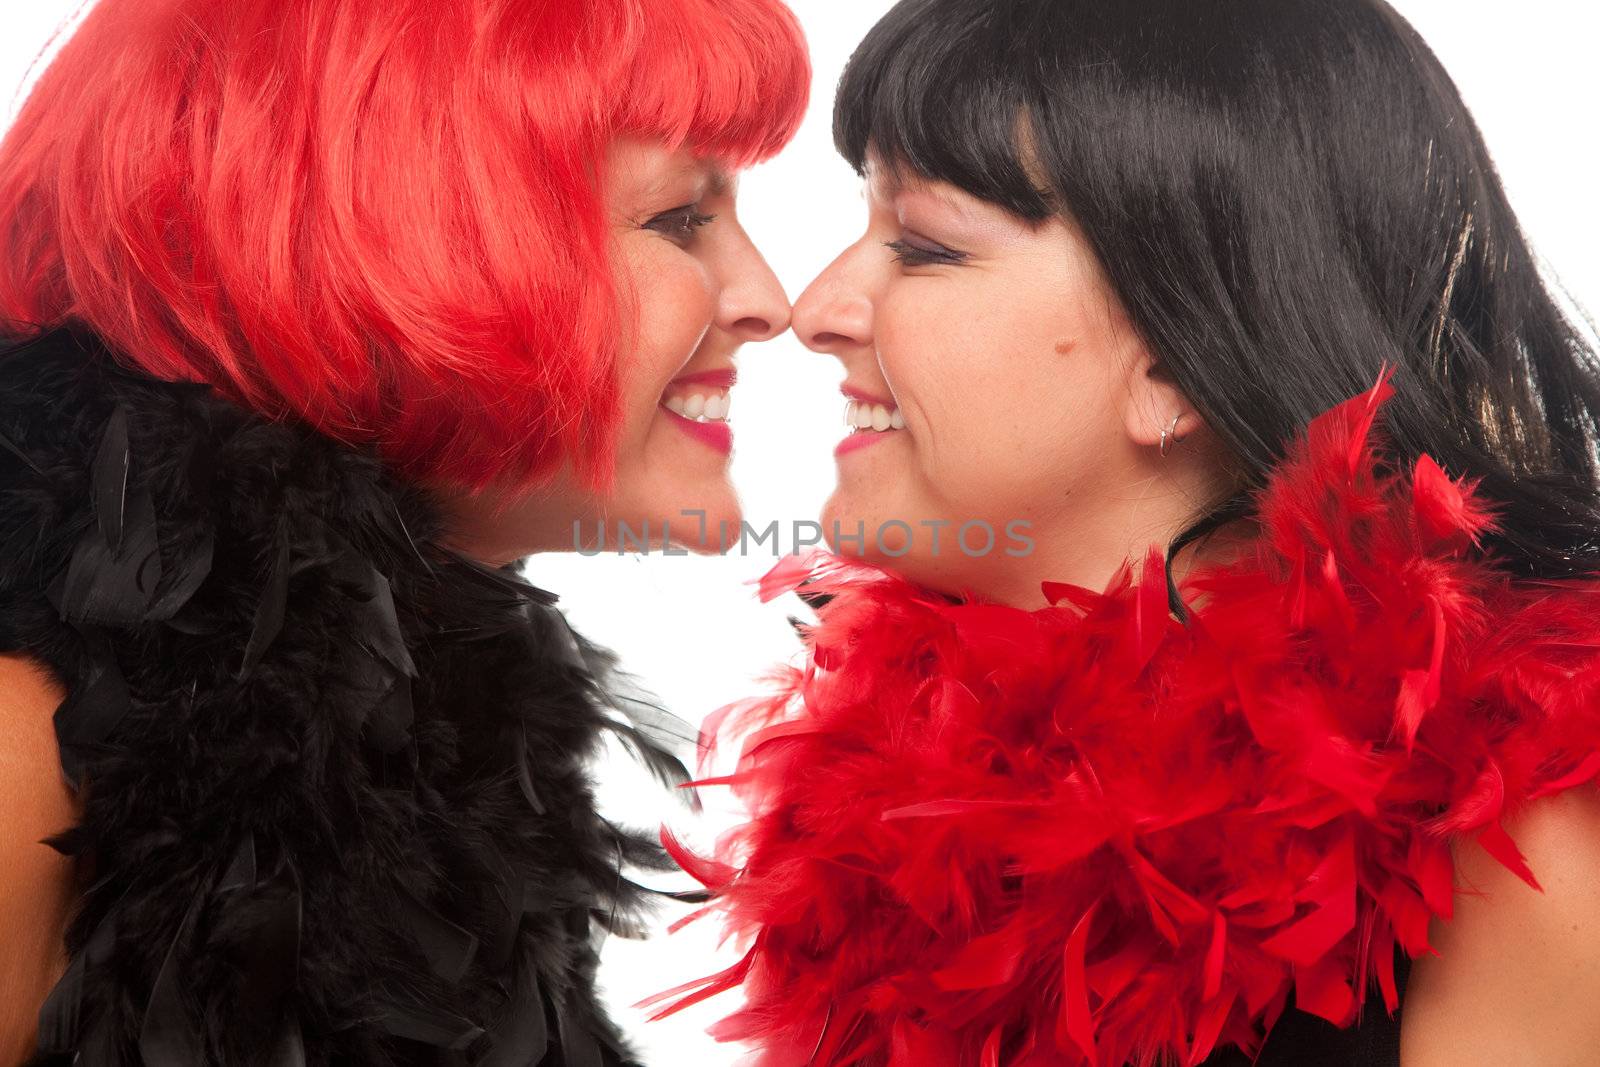 Red and Black Haired Women Smiling at Each Other by Feverpitched